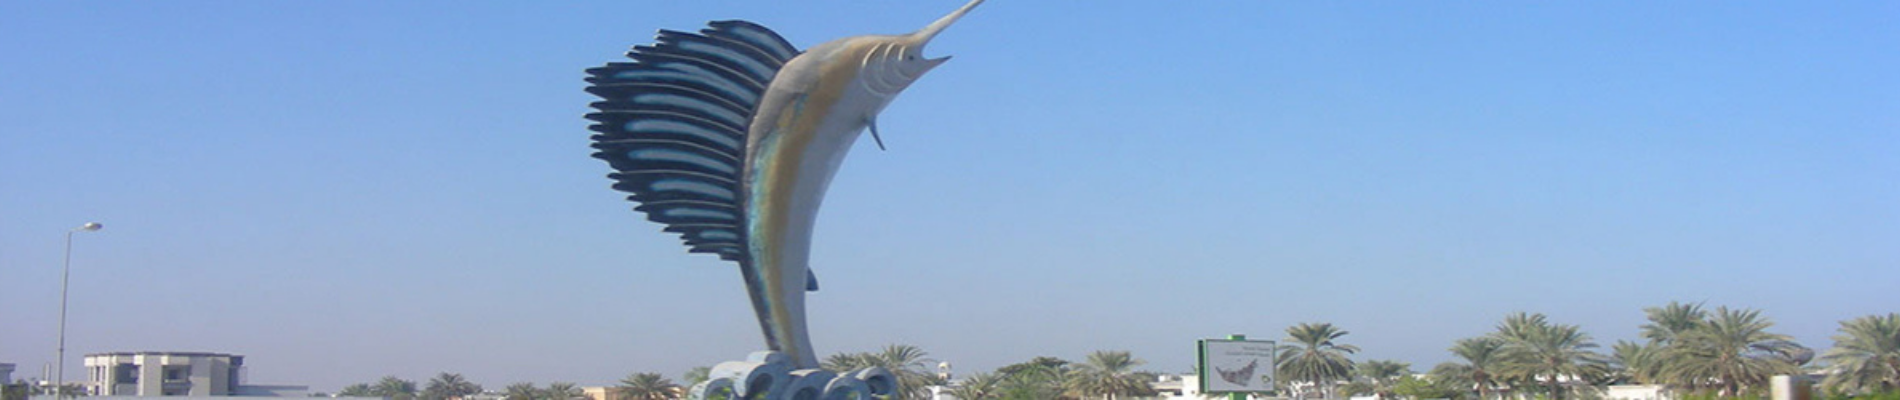 Advantages of setting up business in Umm-Ul-Quwain mainland